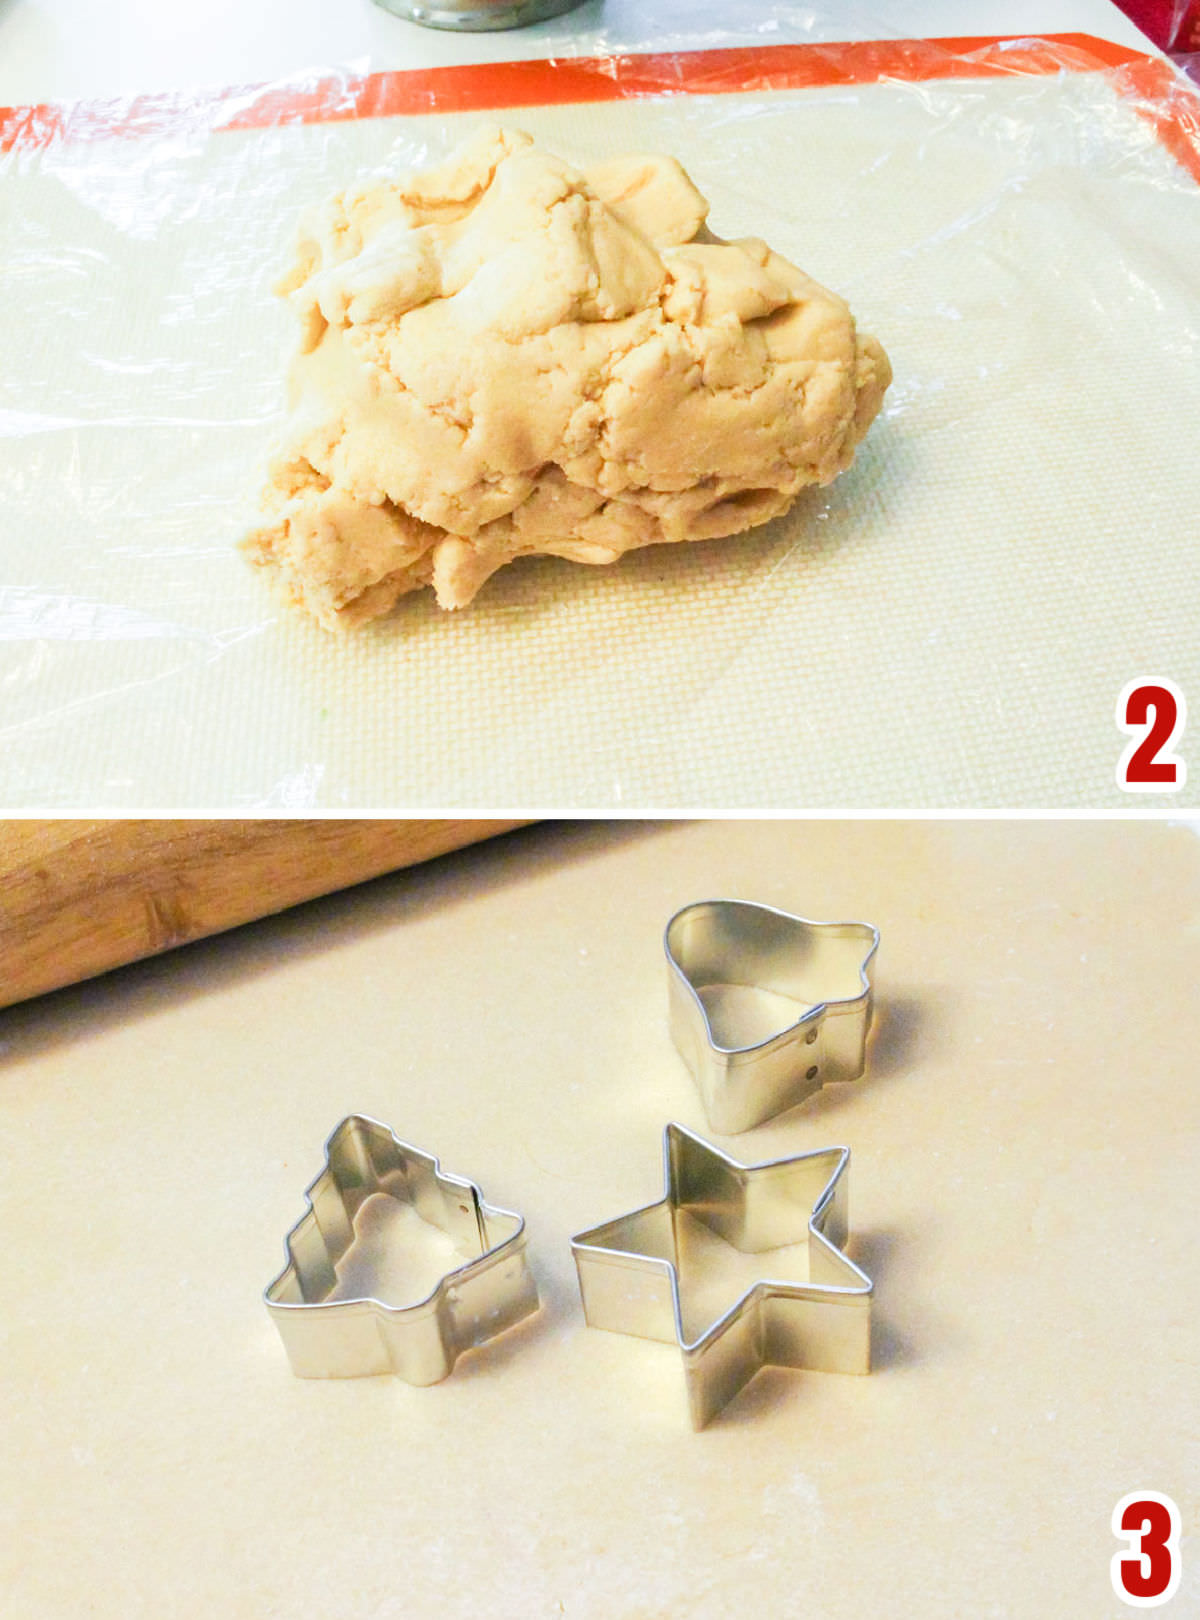 Collage image showing the steps for rolling out the sugar cookie dough and cutting out the cookies with small Christmas Cookie Cutters.